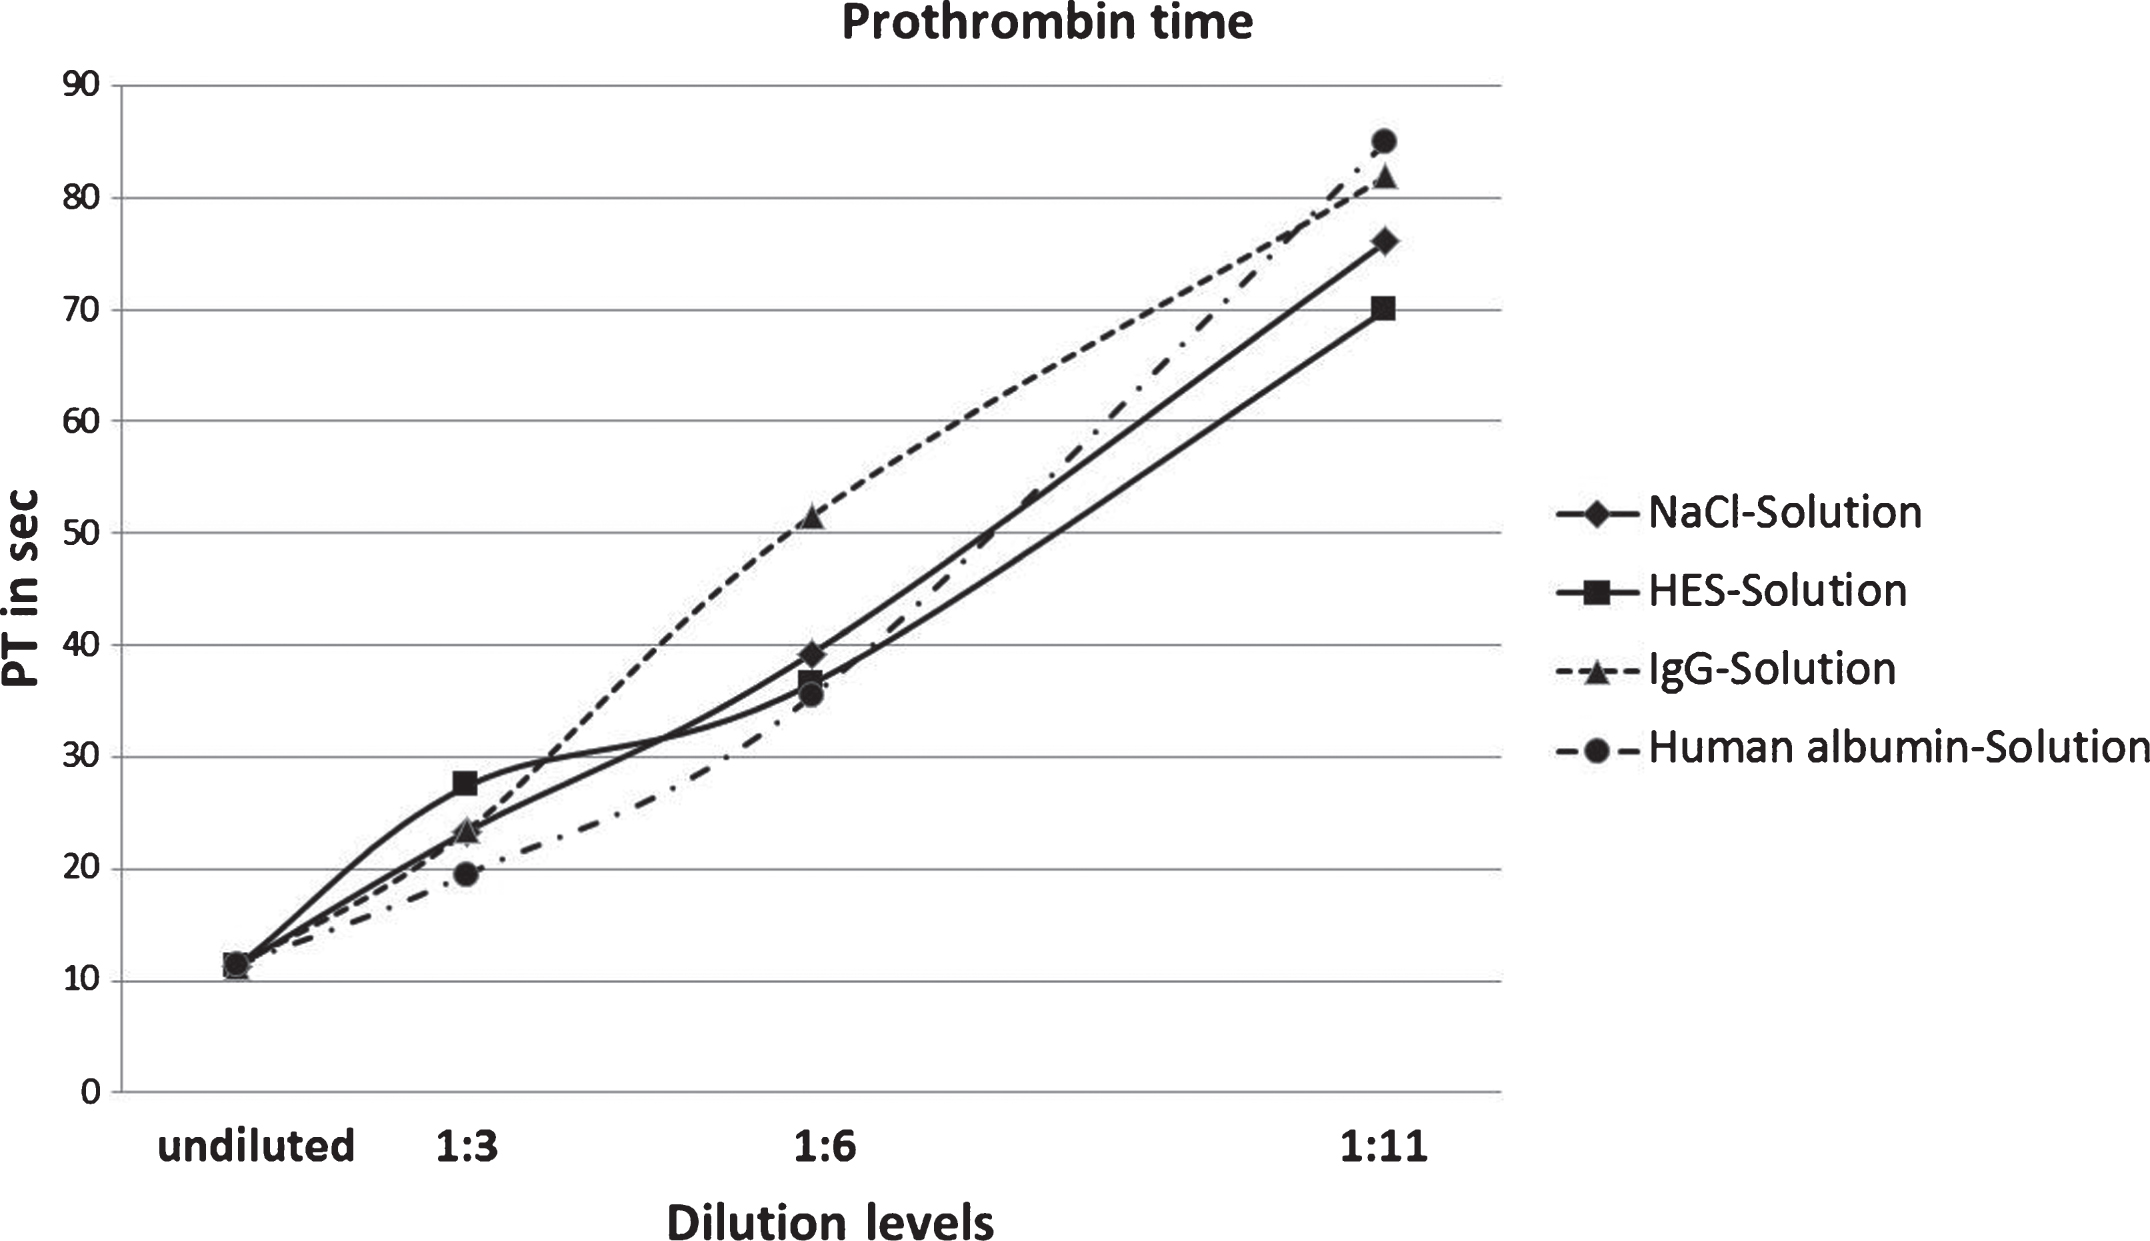 Results of prothrombin time measurements of NaCl, HES, IgG and human albumin solutions in four degrees of dilution.